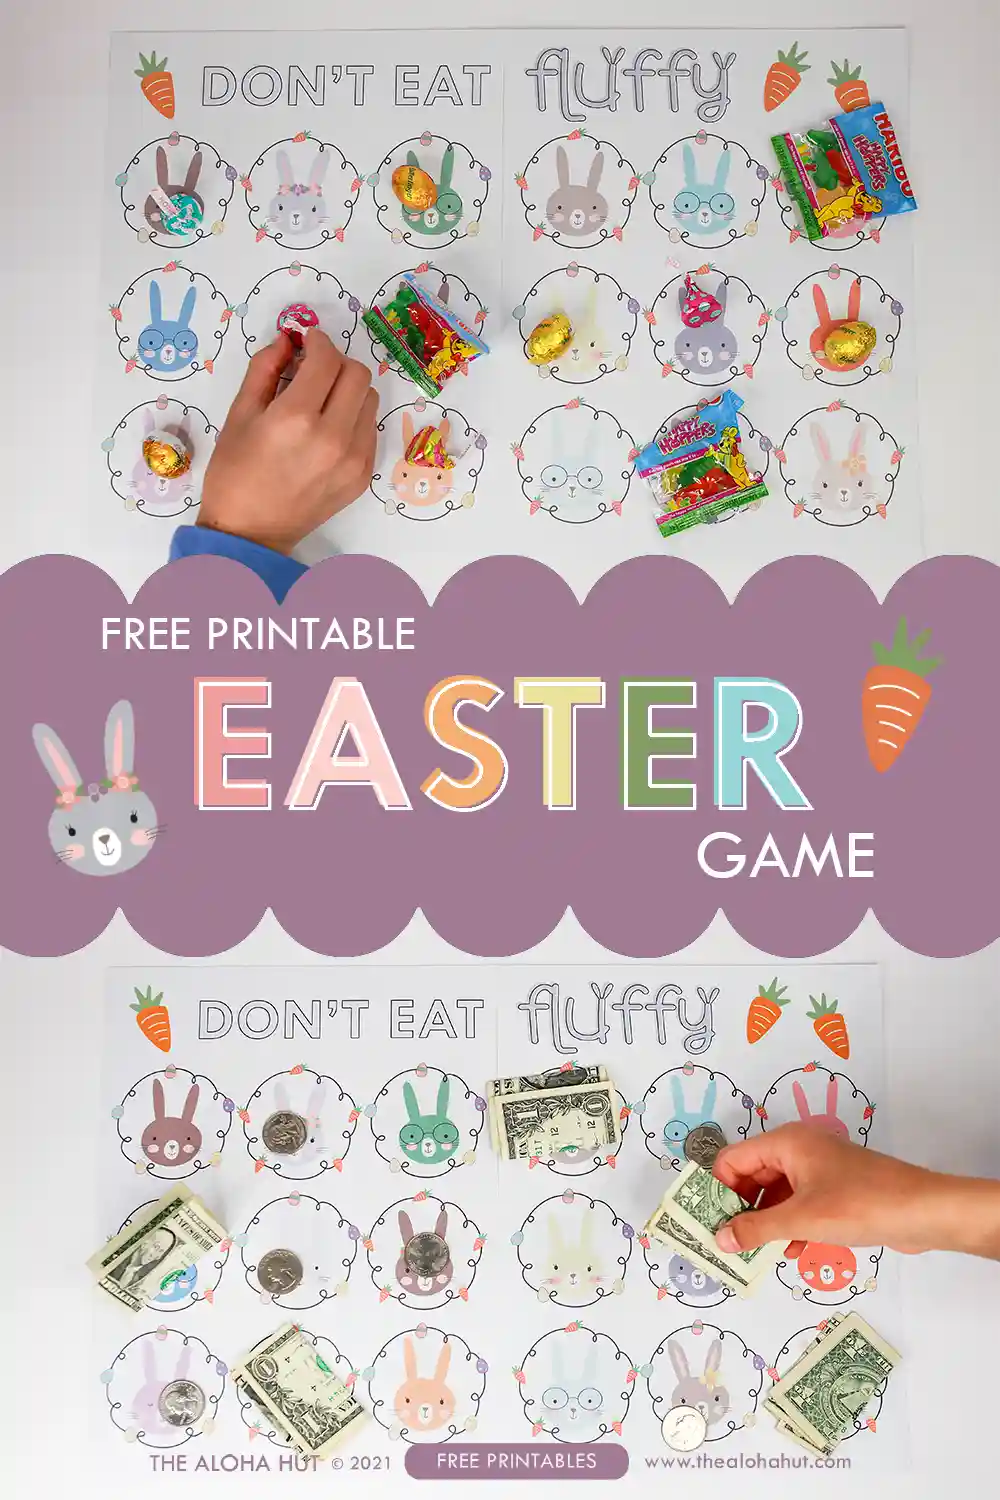 Fun and easy Easter game for kids. This printable Easter game is similar to the Don't Eat Pete game, but the Easter version called Don't Eat Fluffy. This is an easy Easter game for your kids Easter party or for an Easter game for a class party at school. Print and let the kids earn yummy Easter treats or small Easter prizes.